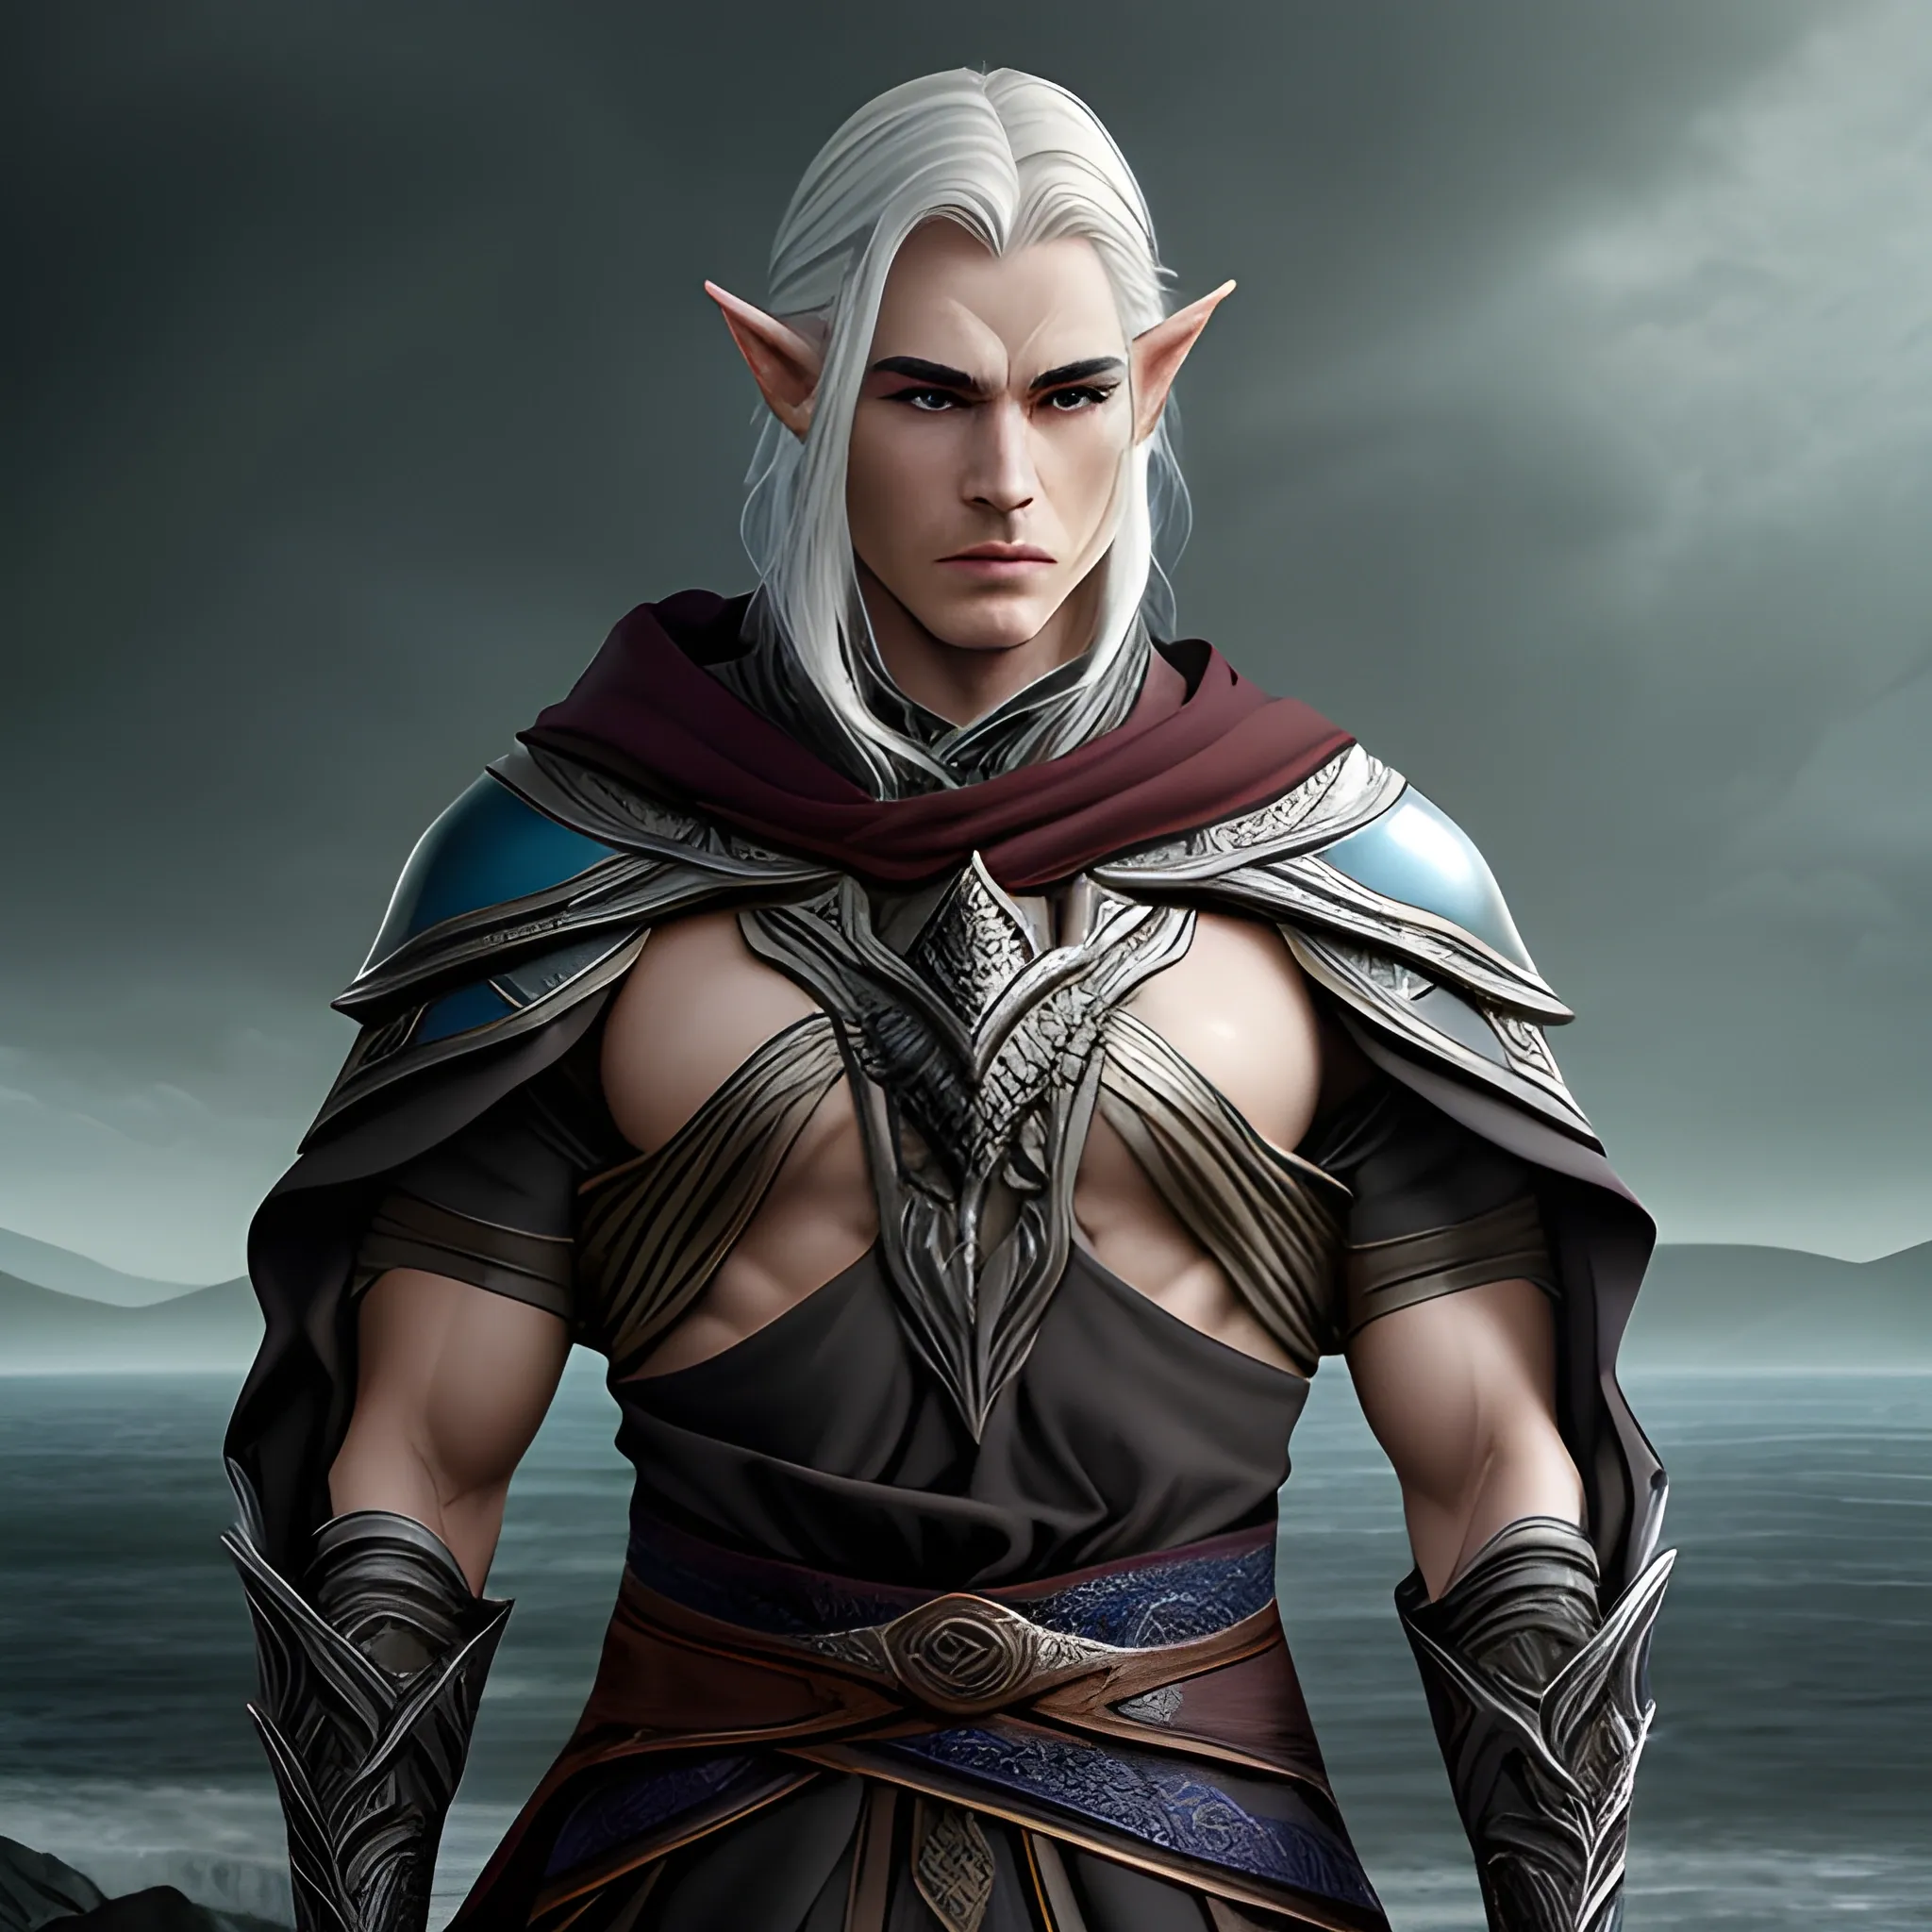 Kaelen Stormrider possesses a commanding presence, enhanced by his unique combination of elven and human features. Standing at a moderate height, he exudes an air of confidence and strength. His physical appearance reflects his diverse heritage, incorporating the elegance of the elves and the resilience of humans.

Kaelen's facial features are a harmonious blend of refined elven beauty and rugged human strength. His face is framed by dark, wavy hair that falls to his shoulders, accentuating his sharp cheekbones and a strong jawline. His fair skin, tinged with a hint of warmth, highlights the intensity of his piercing eyes.

His eyes, a vibrant shade of sapphire blue, are often described as windows to his soul. They emanate an aura of determination and unwavering focus, reflecting the celestial energies that course through his veins. They are framed by well-defined eyebrows, adding a touch of intensity to his gaze.

Kaelen's physique is lean yet muscular, a testament to his physical prowess and the rigorous training he has undergone. He carries himself with a confident posture, exhibiting a natural grace that hints at his elven heritage. His movements are fluid and precise, a reflection of the martial discipline he has cultivated.

Draped upon his broad shoulders, Kaelen often wears a cloak of deep blue, adorned with intricate silver trimmings that depict celestial motifs. The cloak billows behind him, evoking an image of a storm on the horizon, as if he is a harbinger of both power and tranquility. His attire consists of practical yet finely crafted garments that allow for ease of movement during combat, blending elements of elven elegance and practical human design.

Kaelen's presence is both captivating and enigmatic, drawing the attention of those around him. With his elven grace, human strength, and a gaze that holds the weight of determination, he stands as a formidable figure, ready to face the challenges that lie ahead on Lumina Isle.

4K, hyper realistic